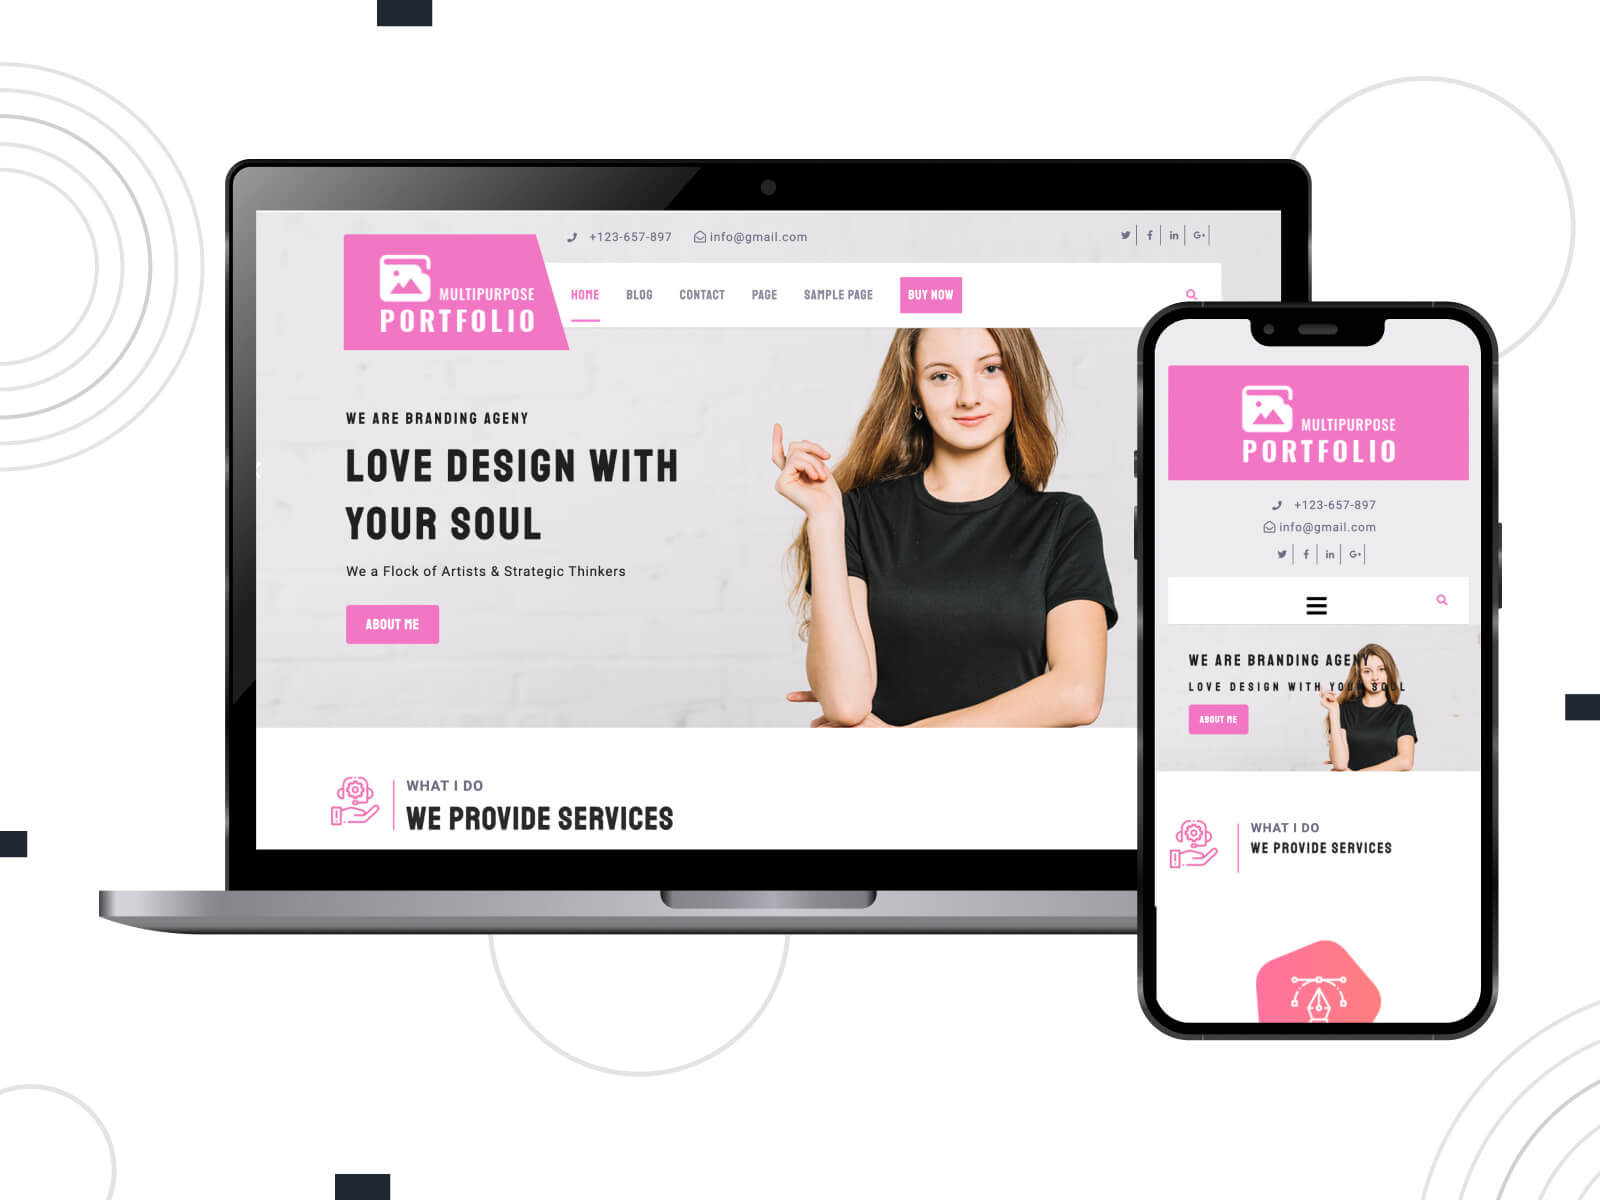 Collage of Multipurpose-portfolio-pro - bright, warm, featuring a wide range of demo templates, this theme stands out among multipurpose WordPress themes for its quick setup options in sienna, peru, and hot pink color combination.